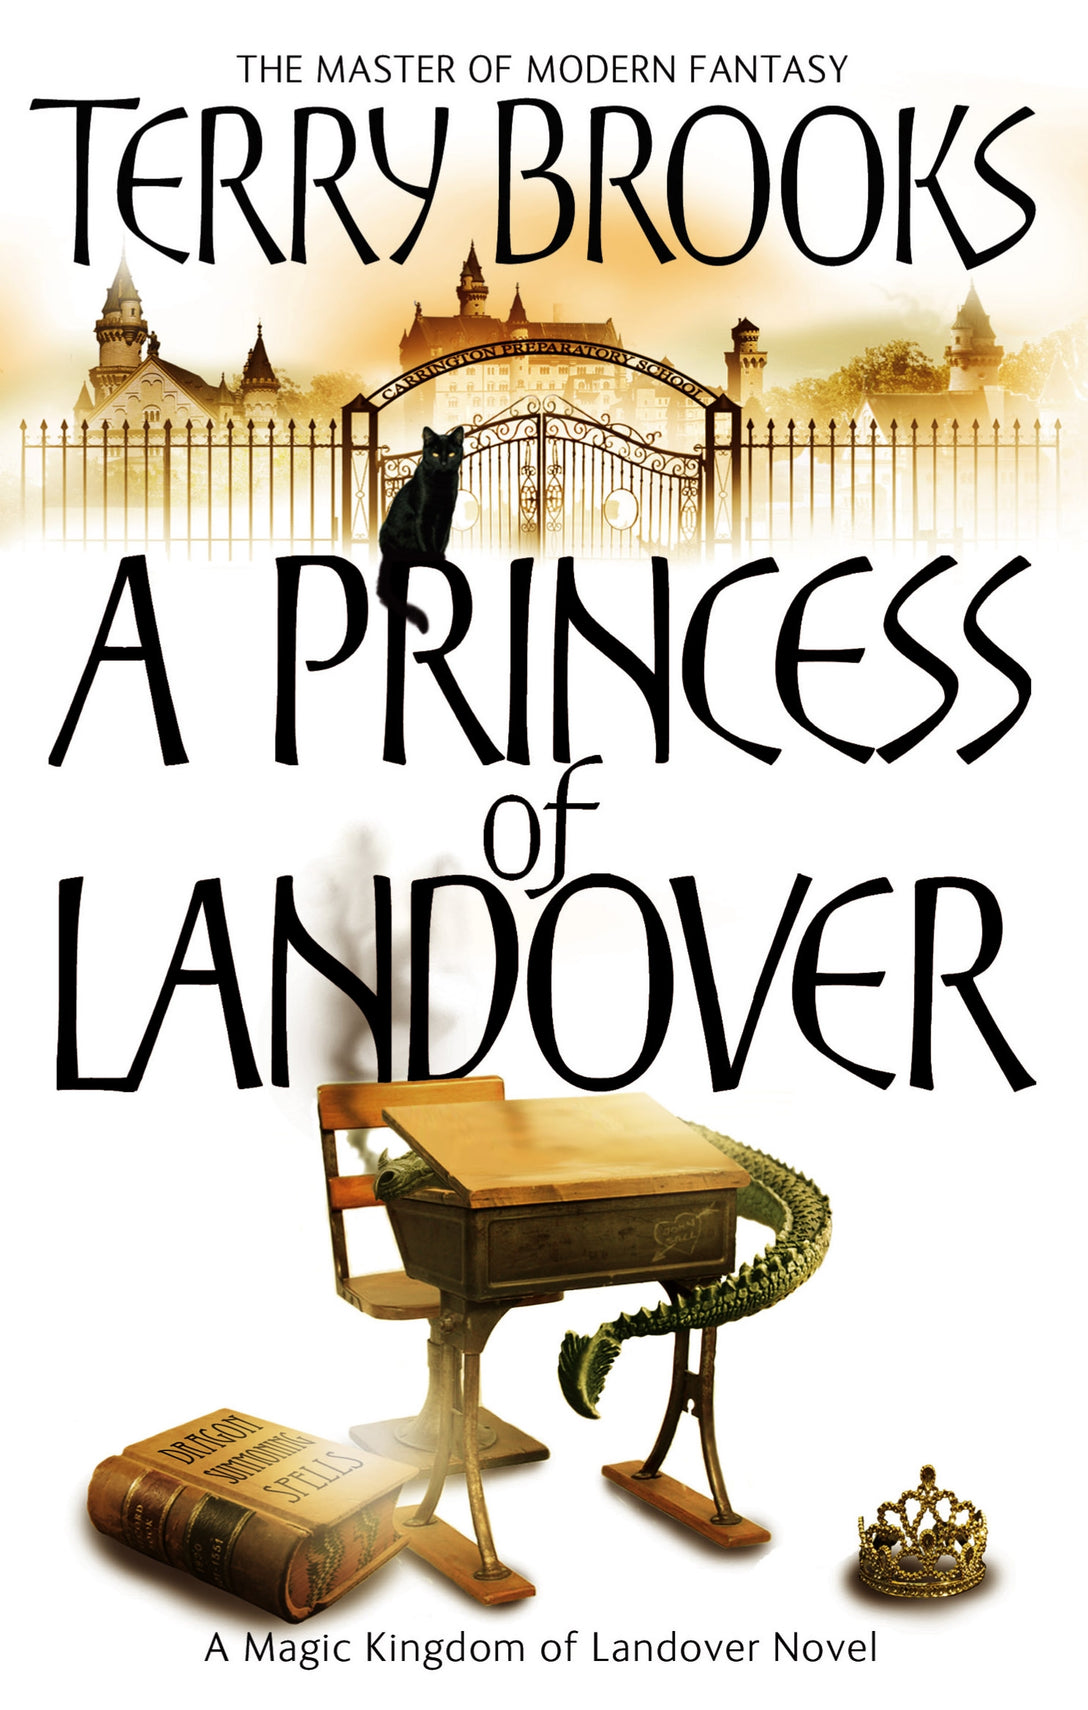 A Princess Of Landover by Terry Brooks